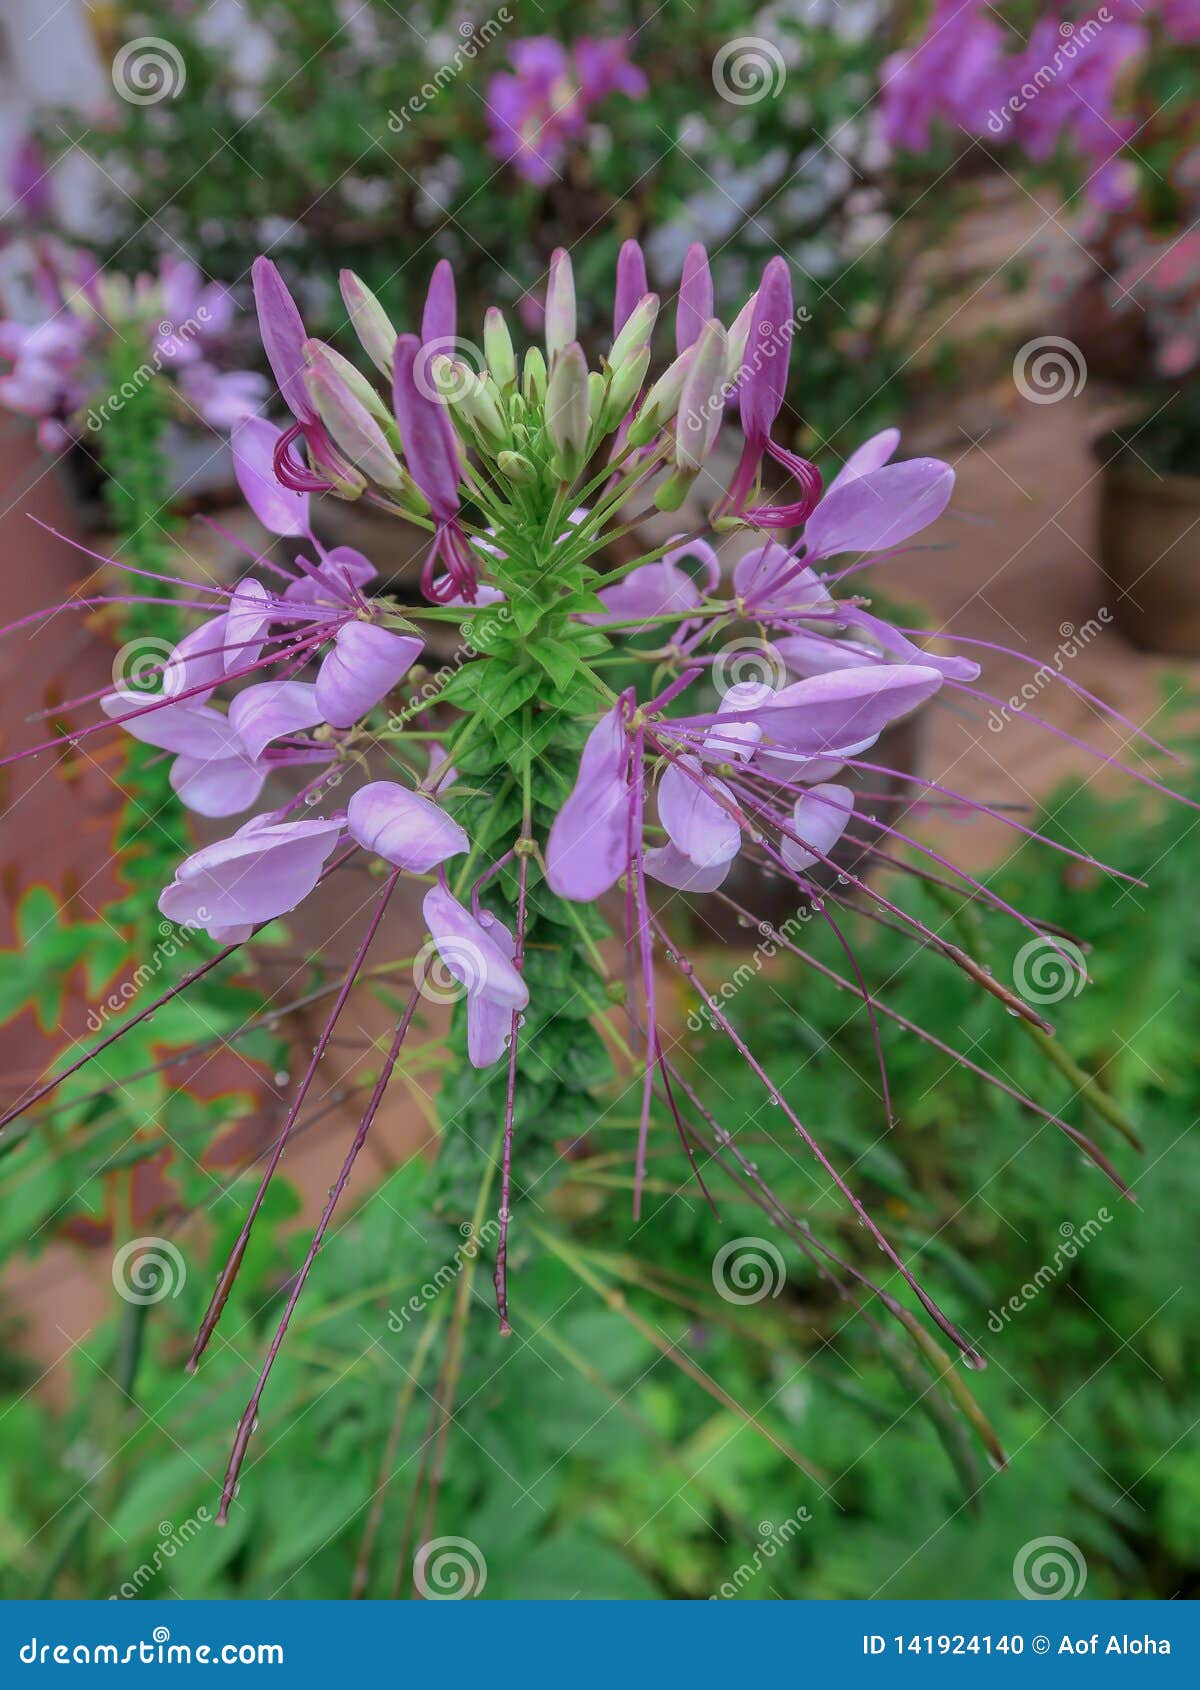 Close Up Purple Cleome Hassleriana Flower Or Spider Flower In A Garden Commonly Known As Spider Plant Pink Queen Or Grandfather Stock Photo Image Of Evergreen Beauty 141924140